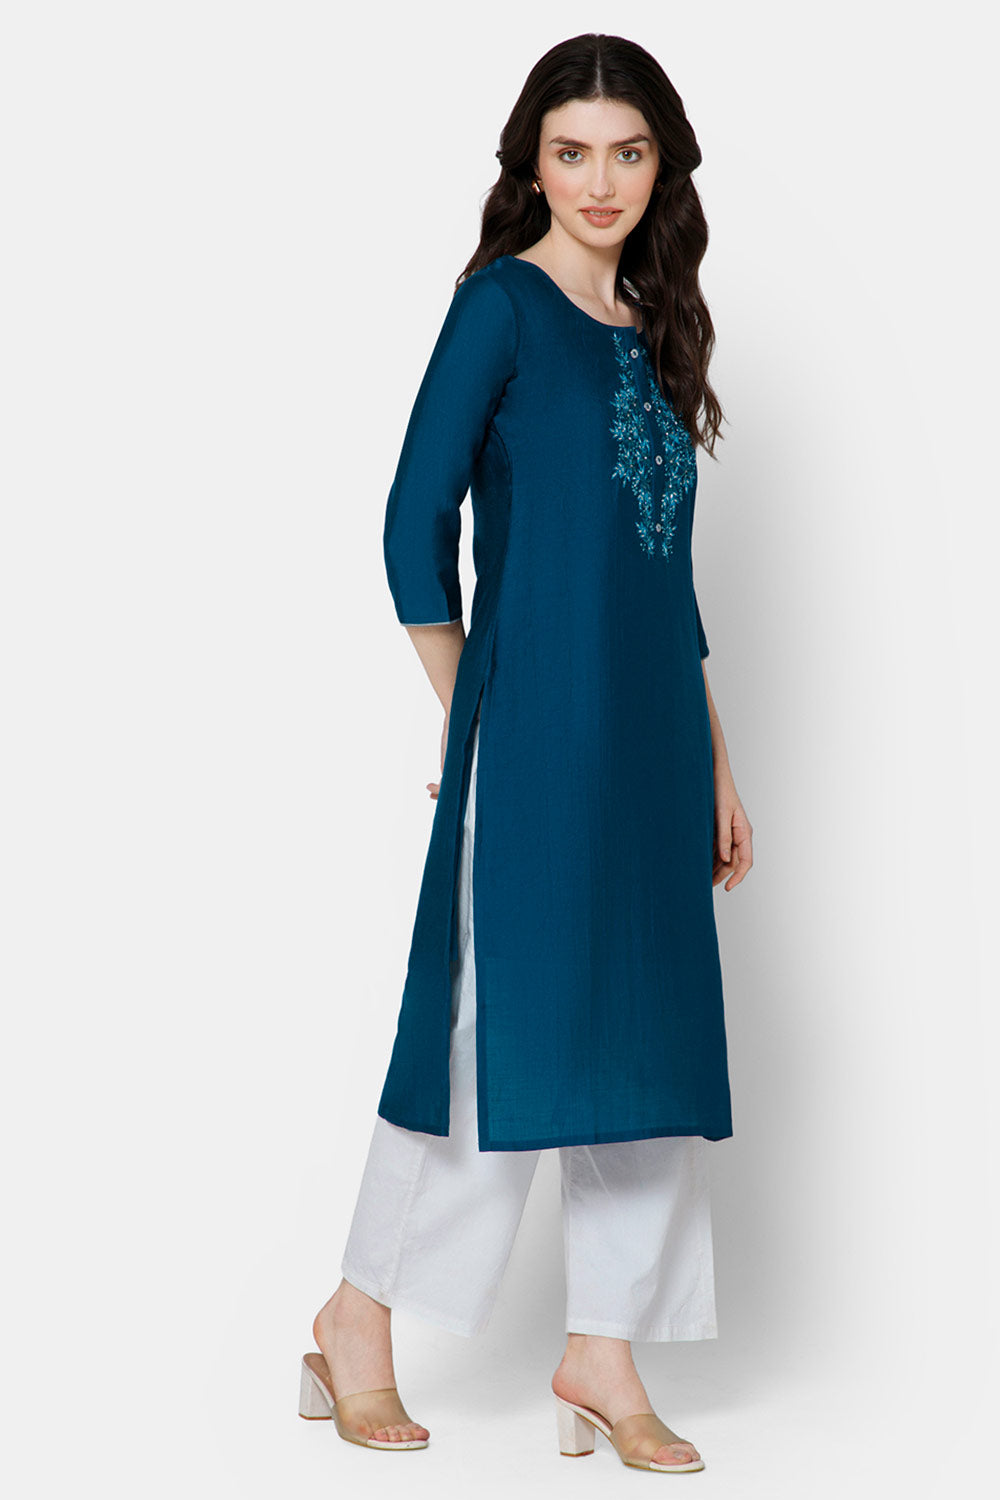 Mythri Women's Kurthi with Intricately Hand Embroidered Center Front - Blue - E053